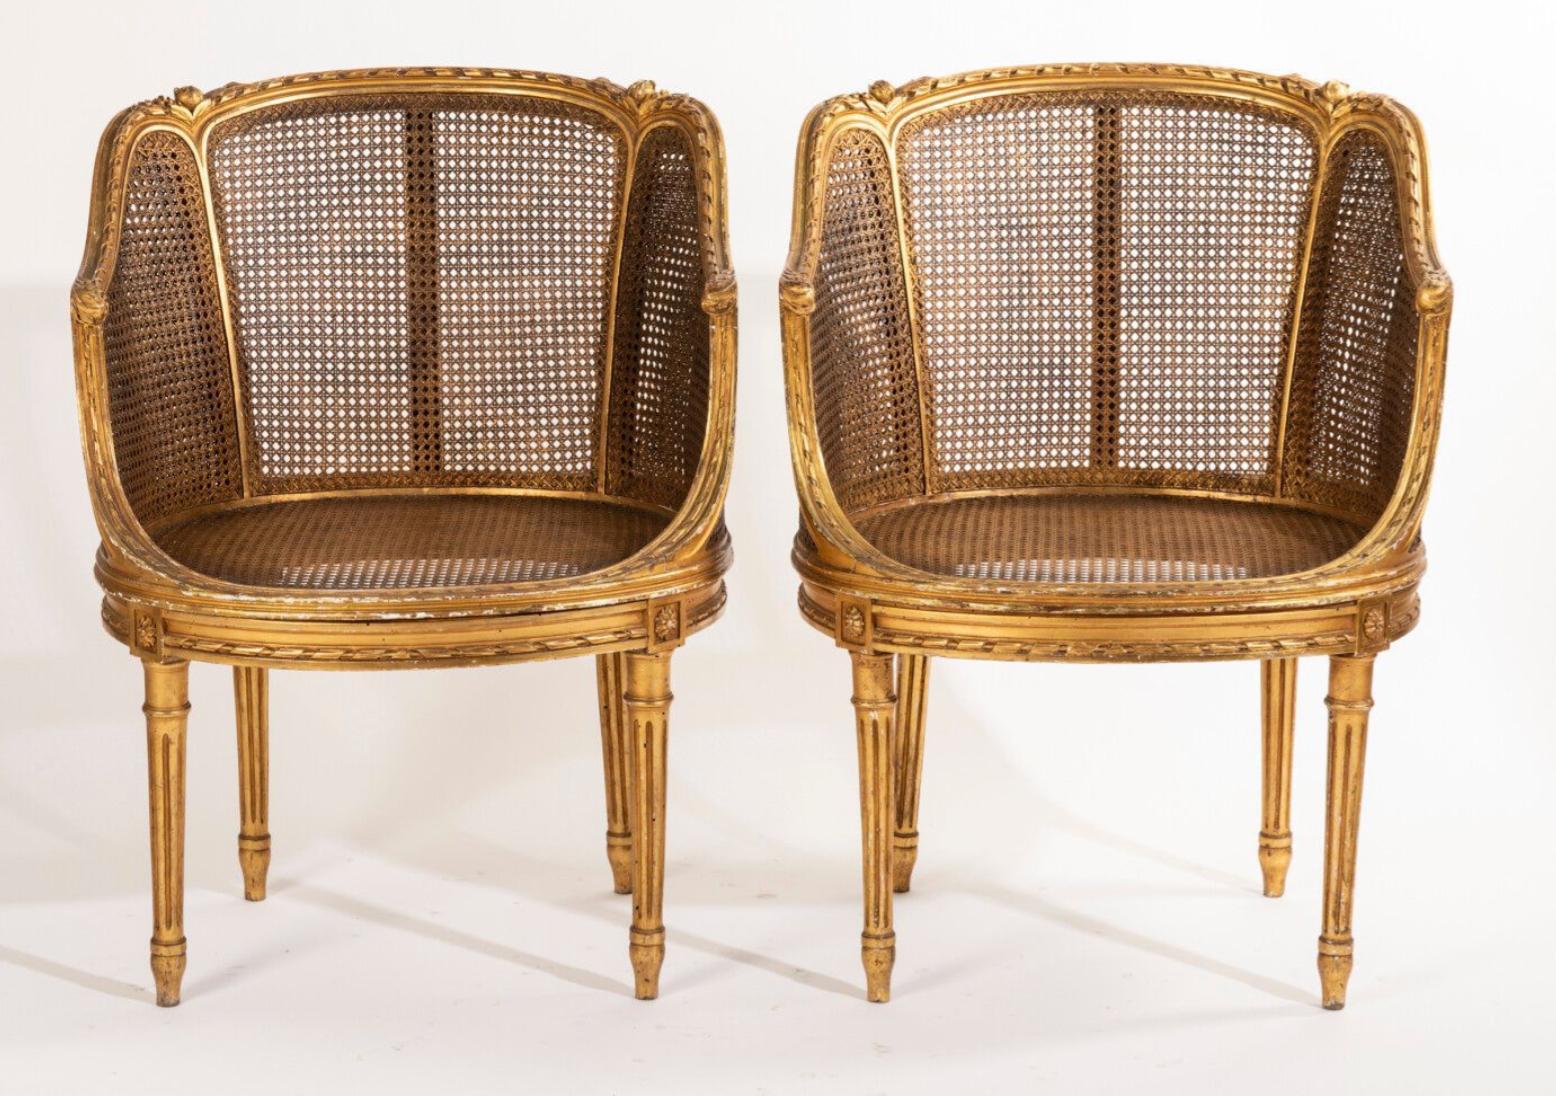 Petite French ballroom round chairs, in Louis XVI style hand carved and gilded frames decorated with friezes of ribbons and roses, tapered fluted base, both with cane backs and the seats. Very good condition.
France, circa 1870.
 